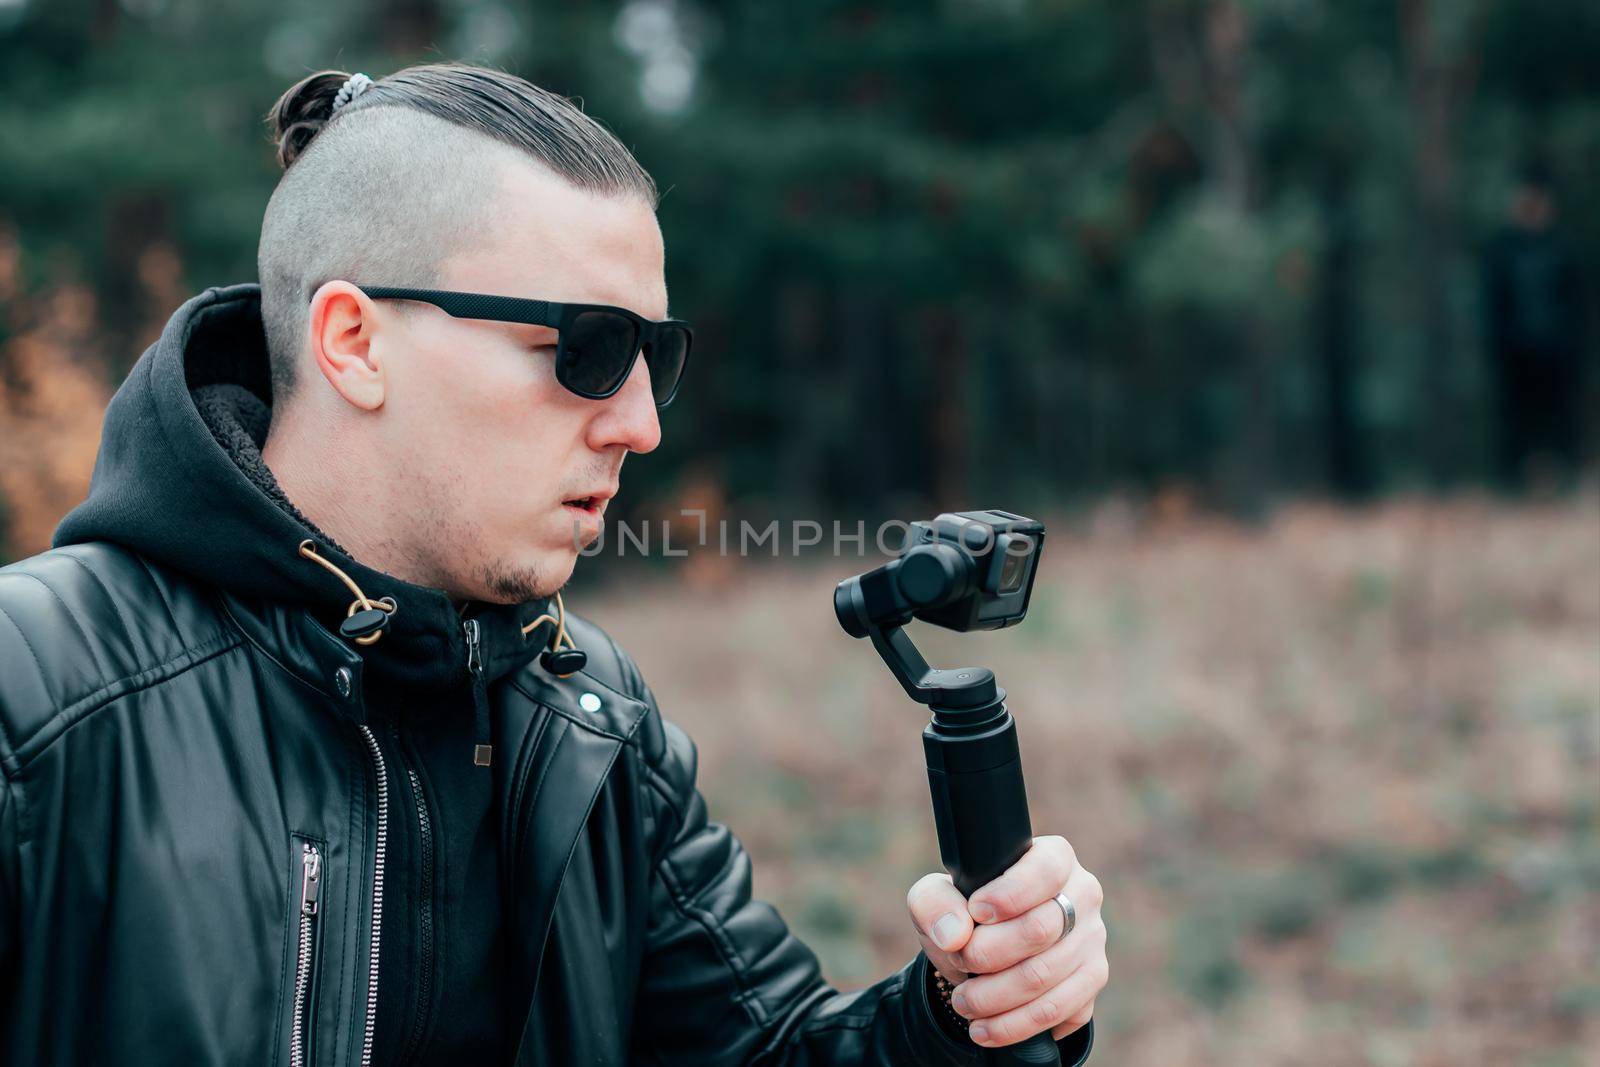 Youthful Blogger in Black Clothes and Sunglasses Making Video Using Action Camera with Gimbal Camera Stabilizer in Pine Forest